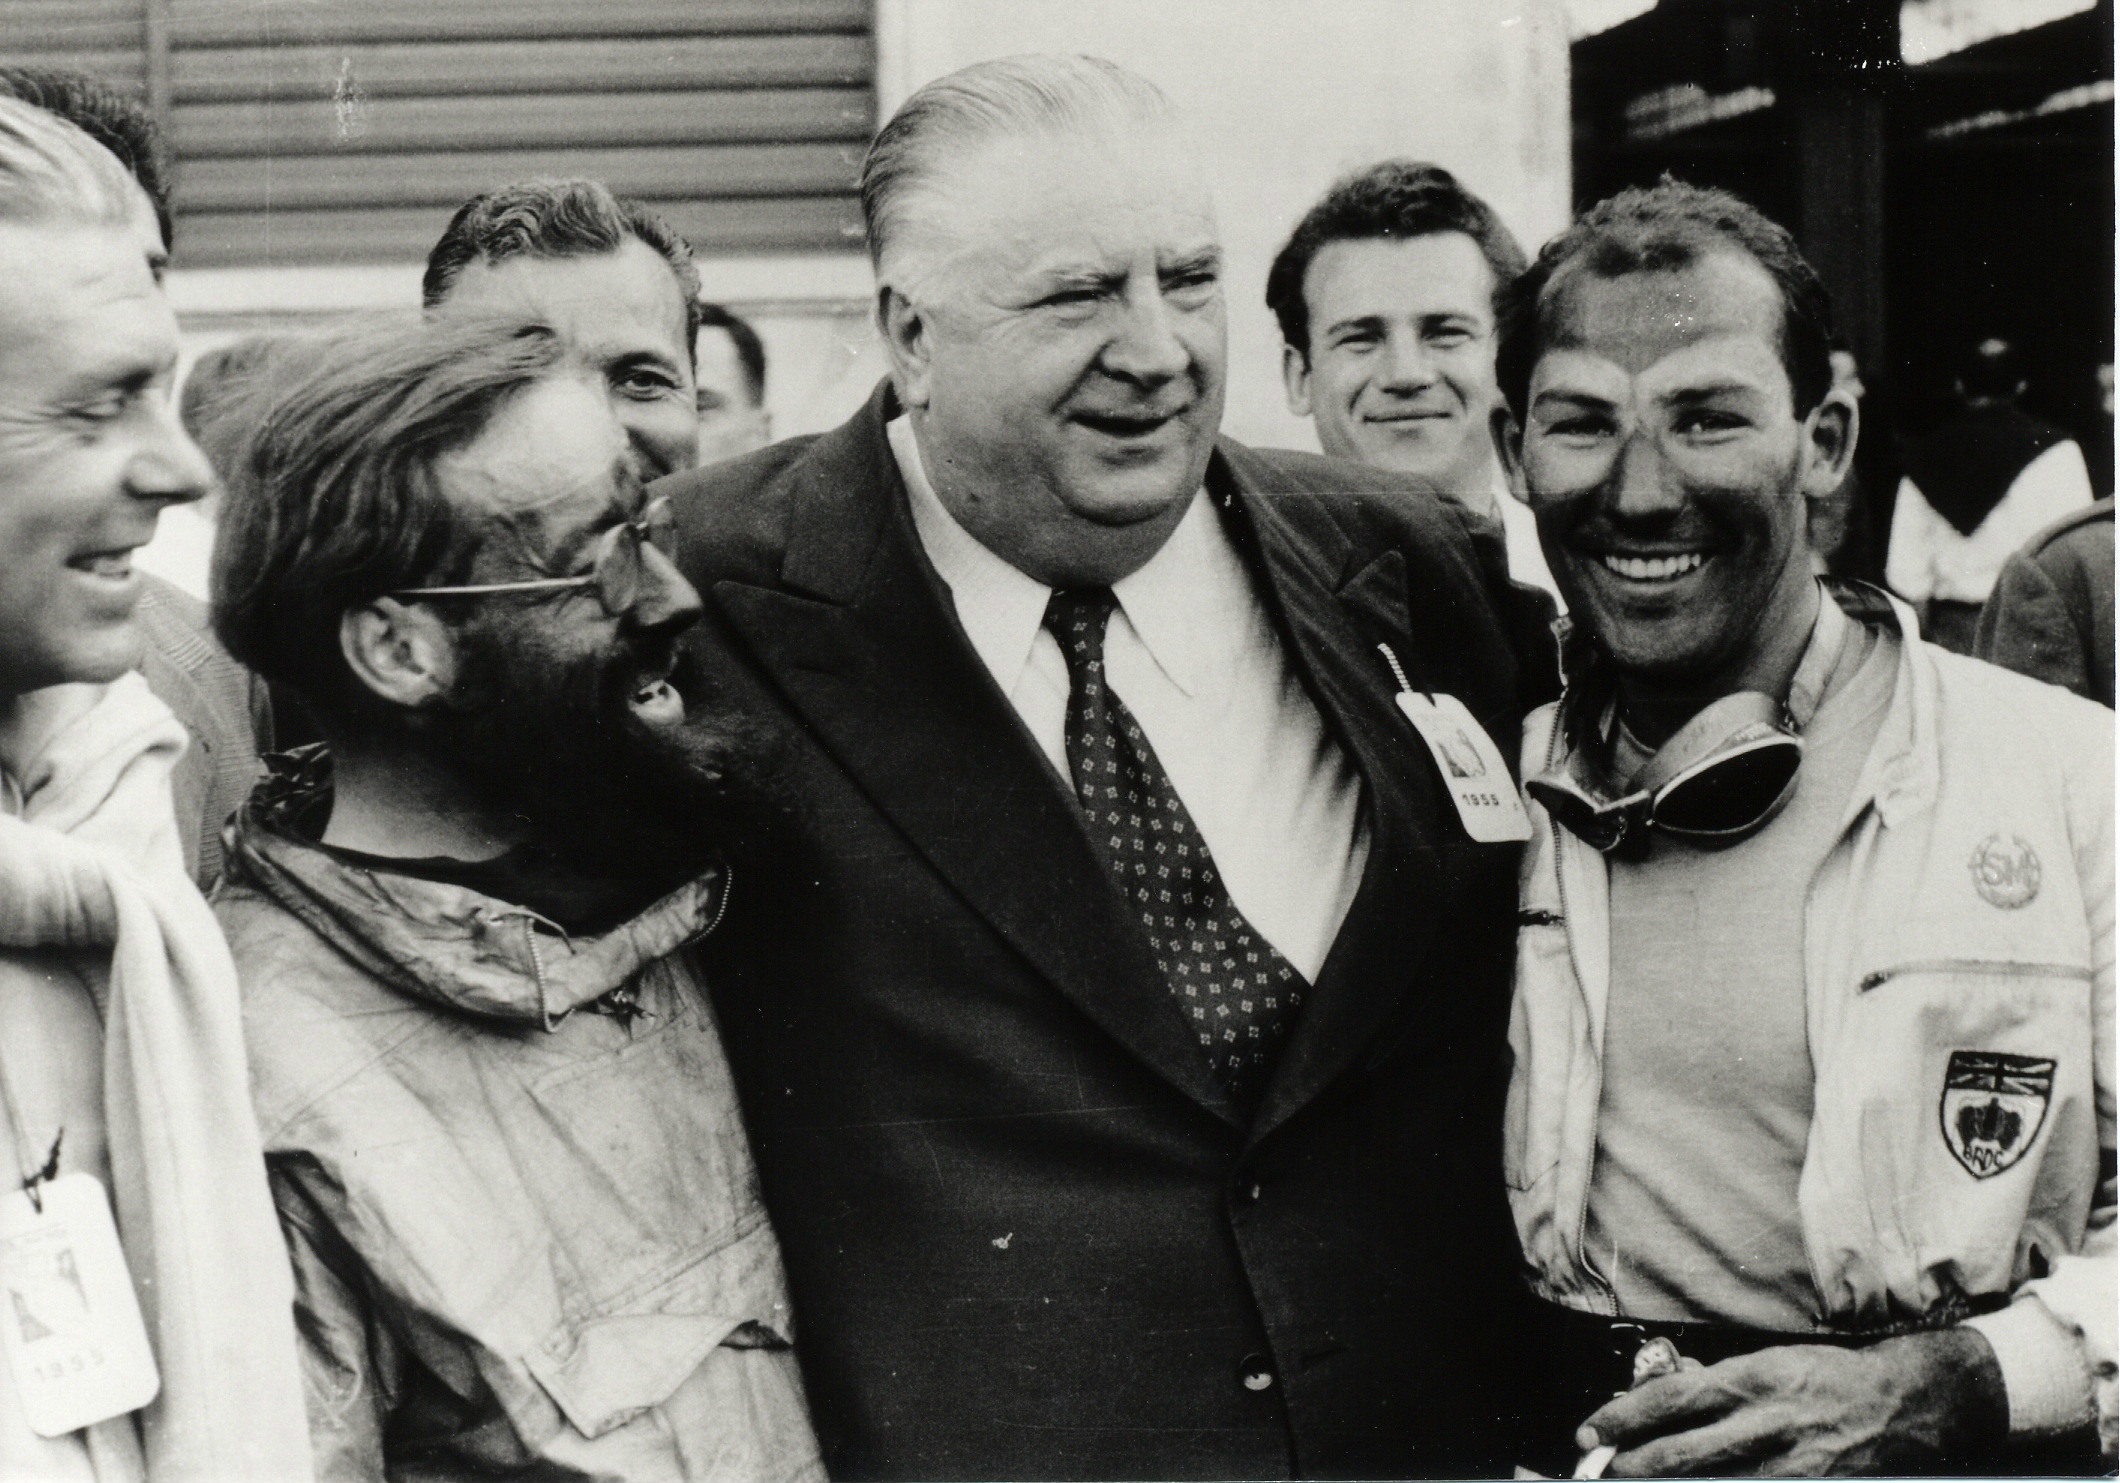 Stirling Moss and Denis Jenkinson after winning the 1955 Mille Miglia